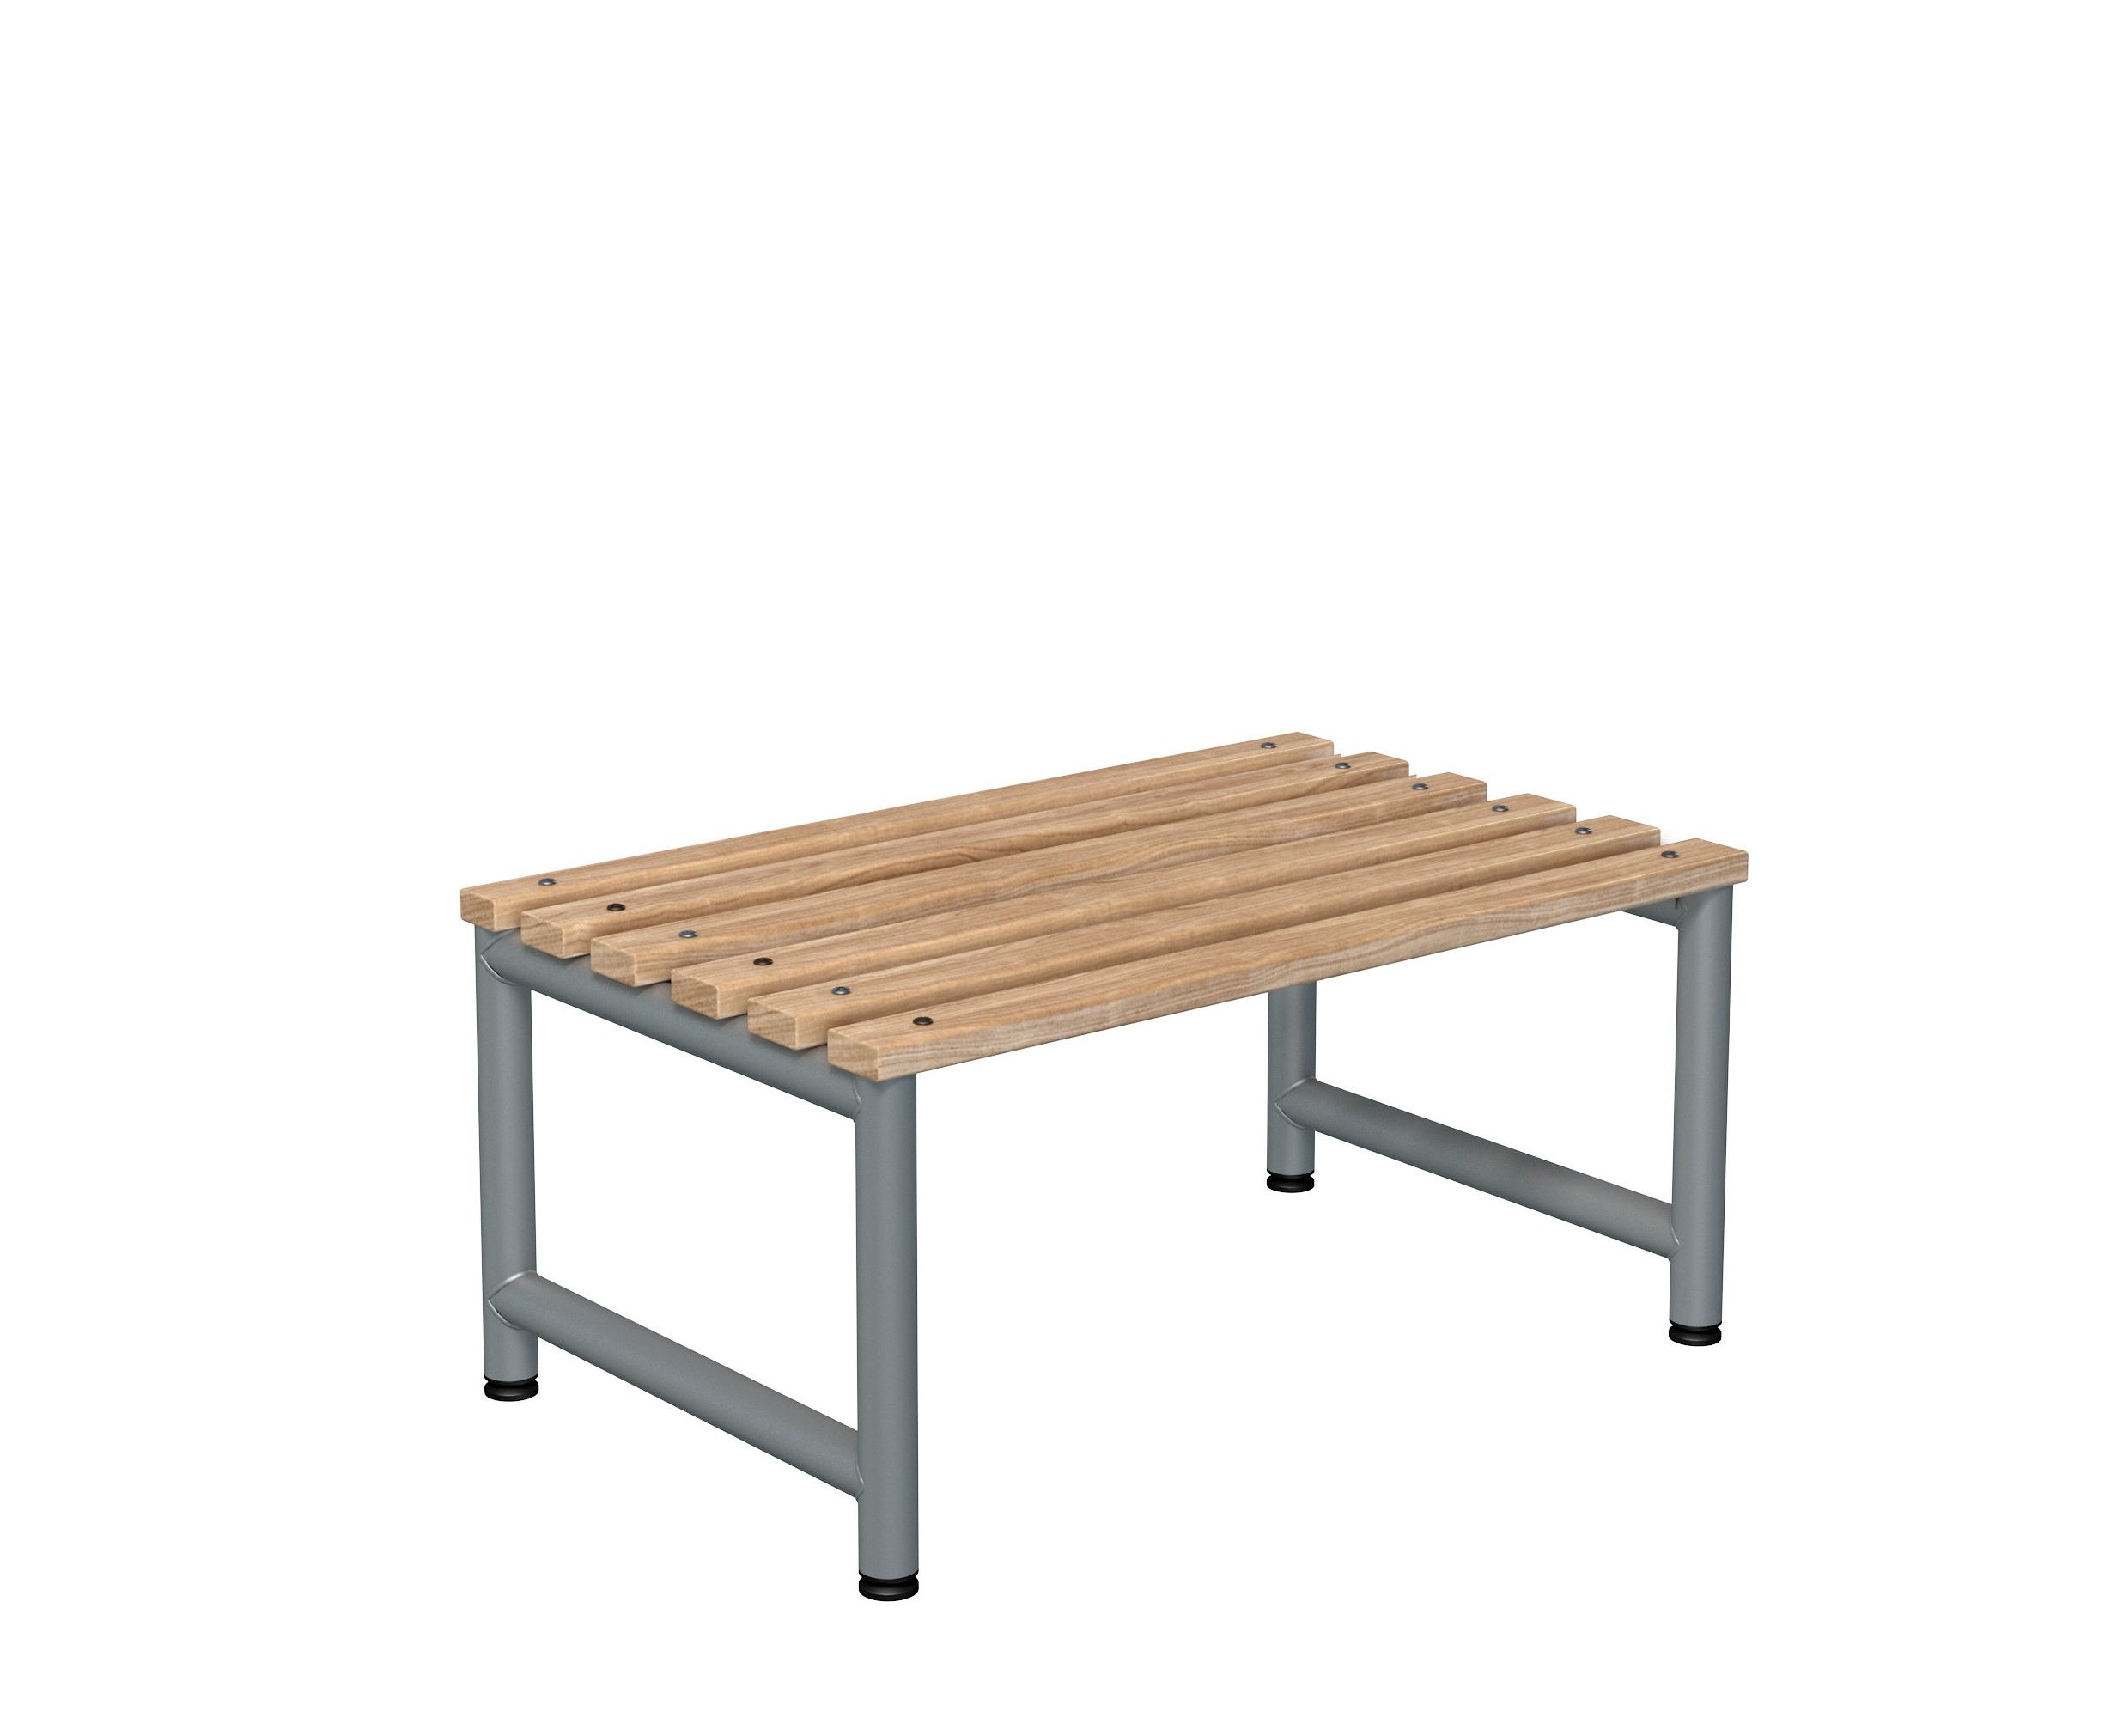 Double Sided Bench Type B - Infant